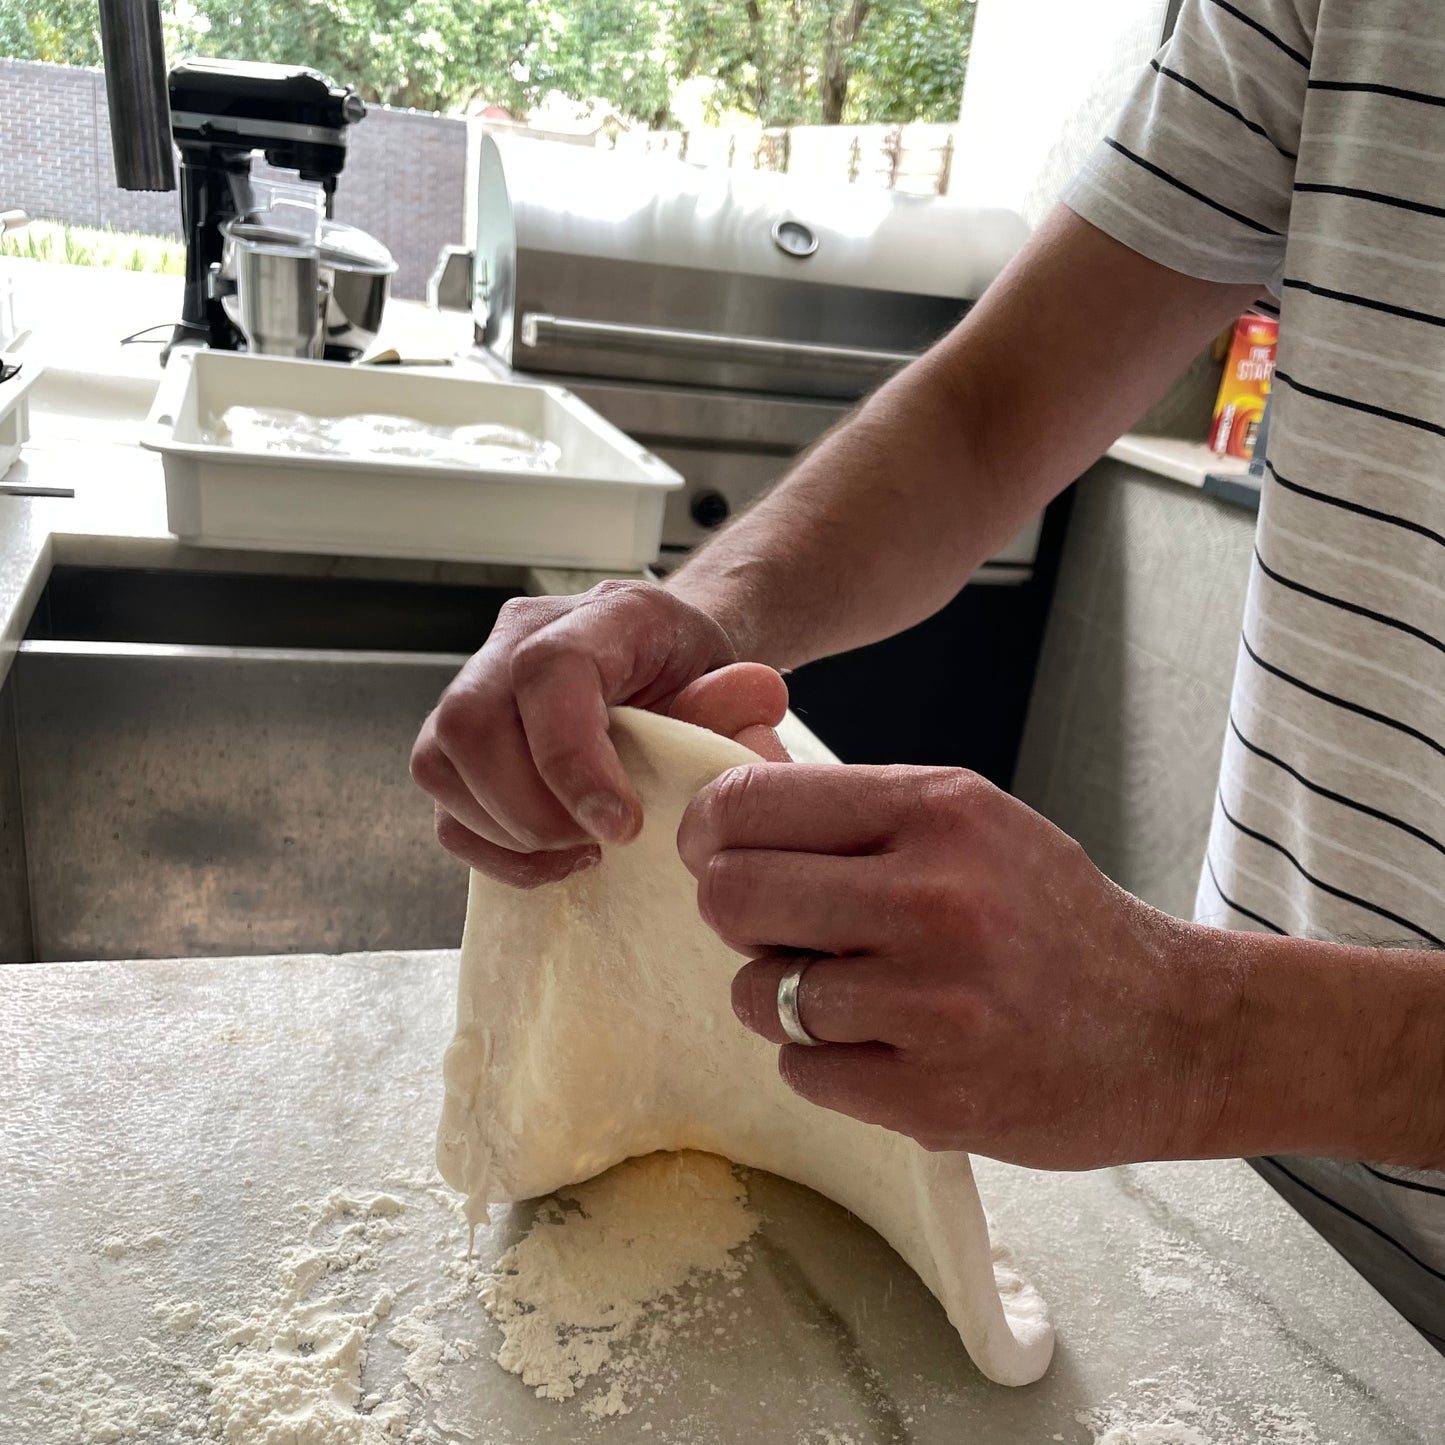 At-Home Dough and Pizza Making Class